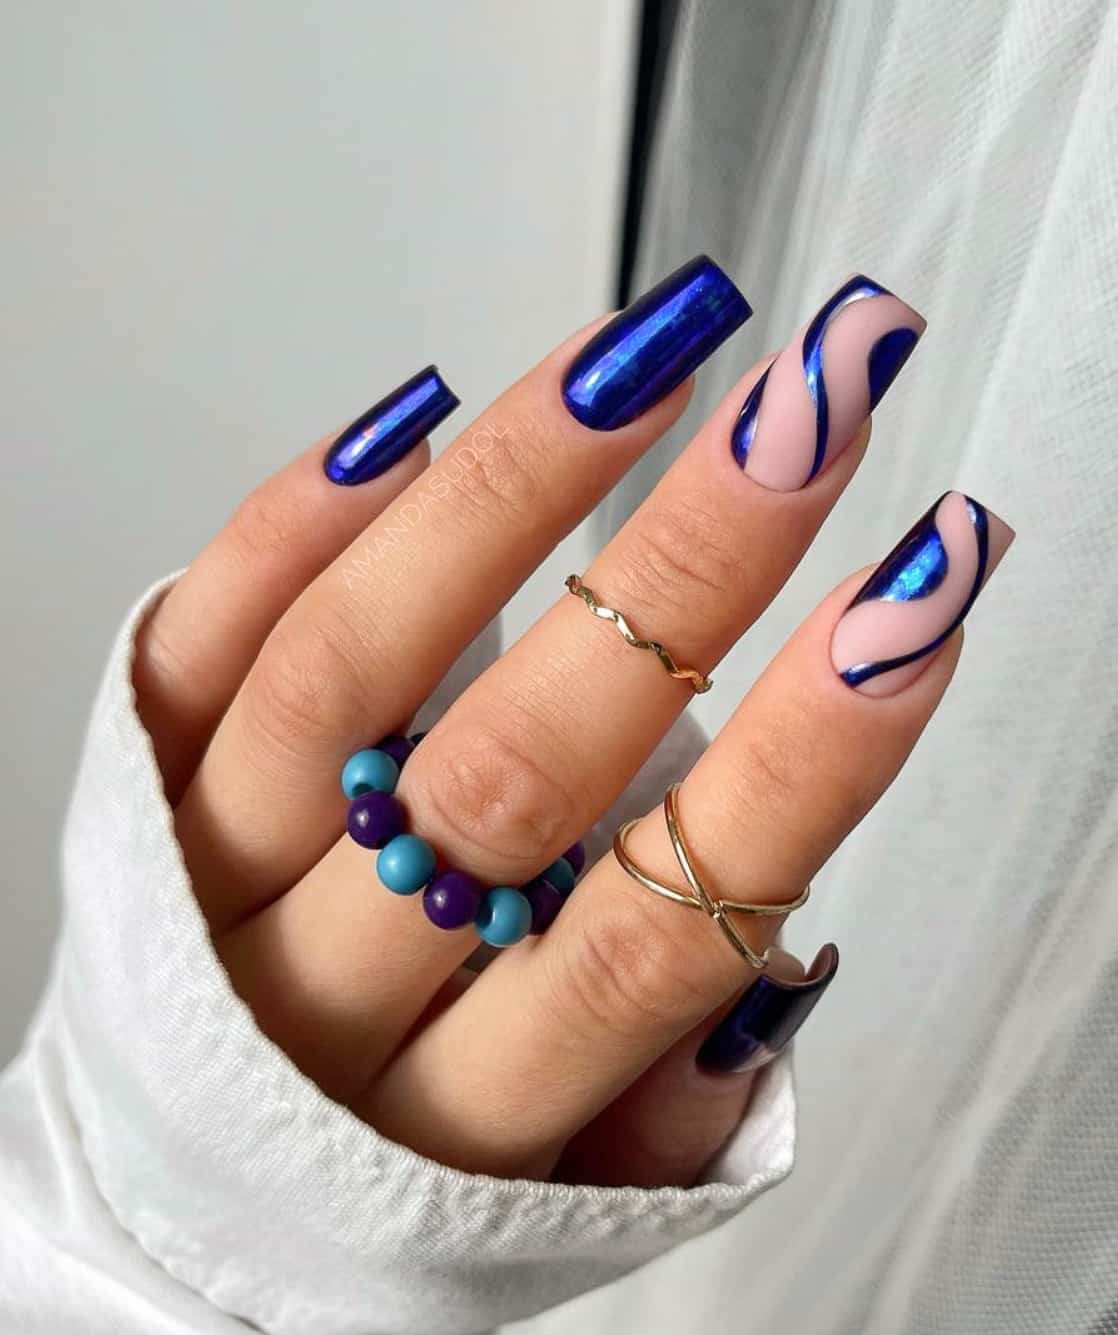 A hand with long square nails painted in a metallic blue polish, with two matte nude accent nails with metallic blue swirls